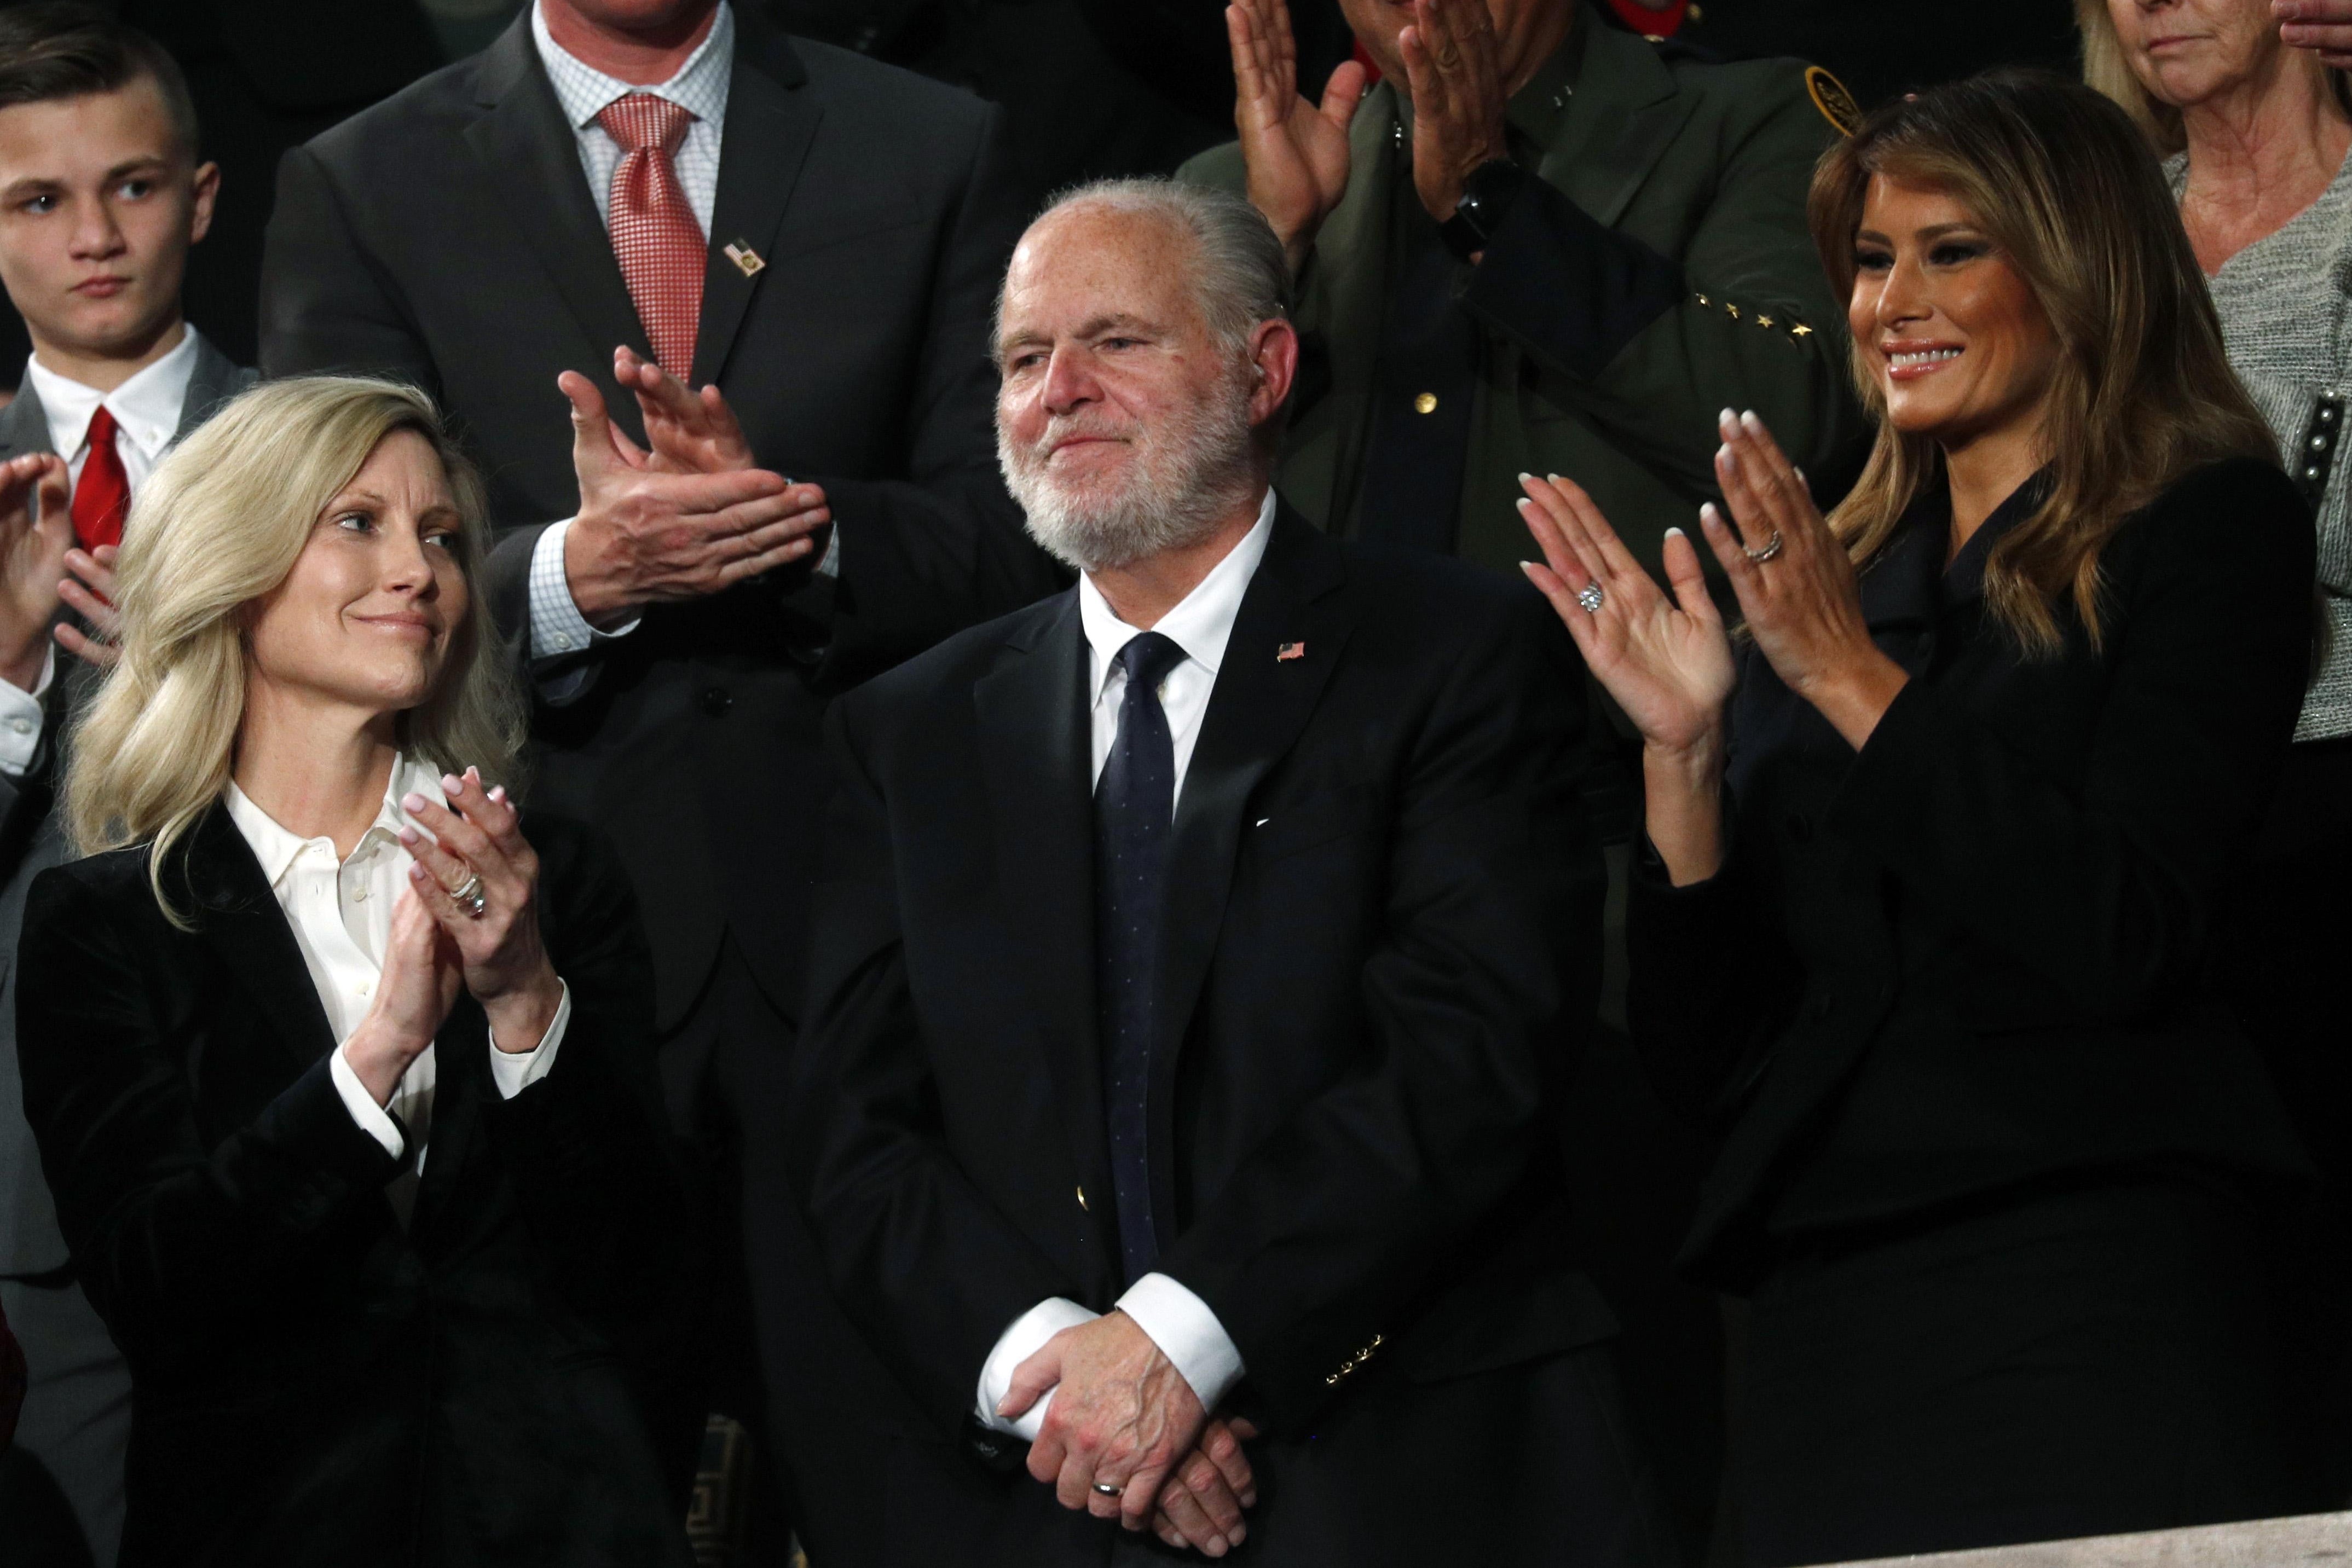 Limbaugh smiles as his wife, Kathryn, and Melania Trump clap beside him.